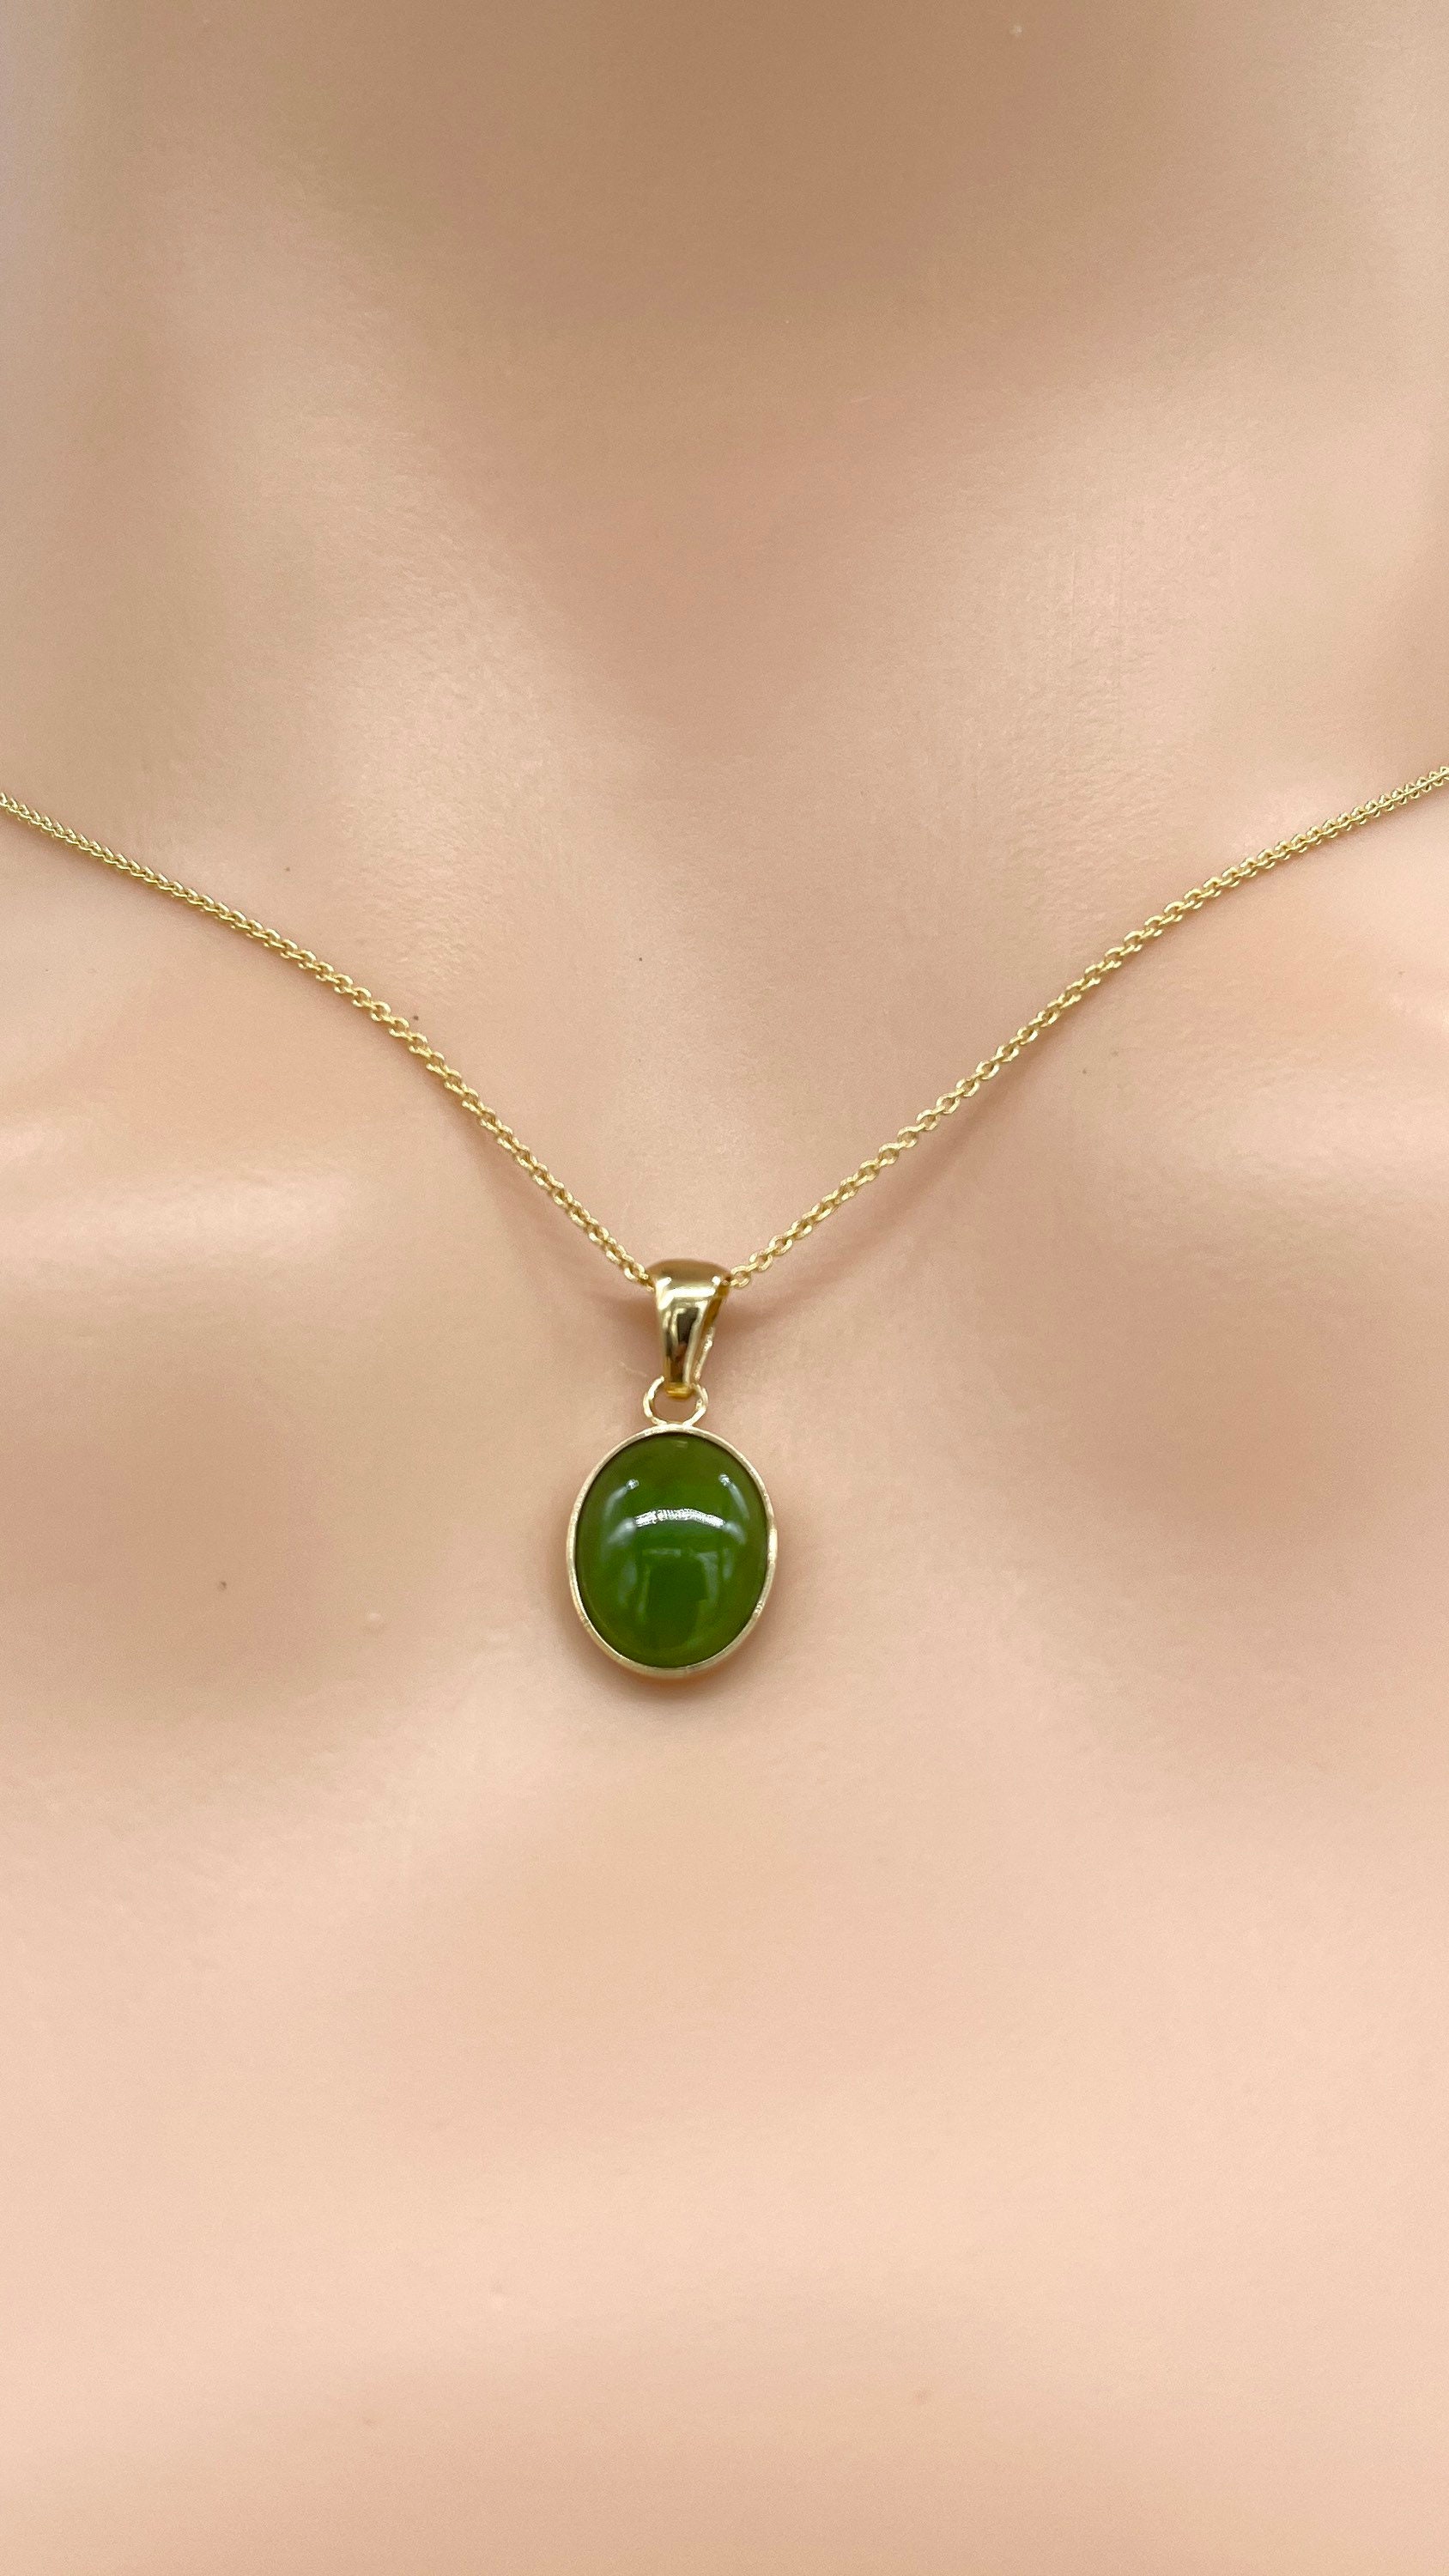 Buy Good Fortune Gold Necklace, Jade Circle Pendant, Success Jewelry, Green Jade  Pendant Necklace, Wealth Necklace, Gold Filled Online in India - Etsy